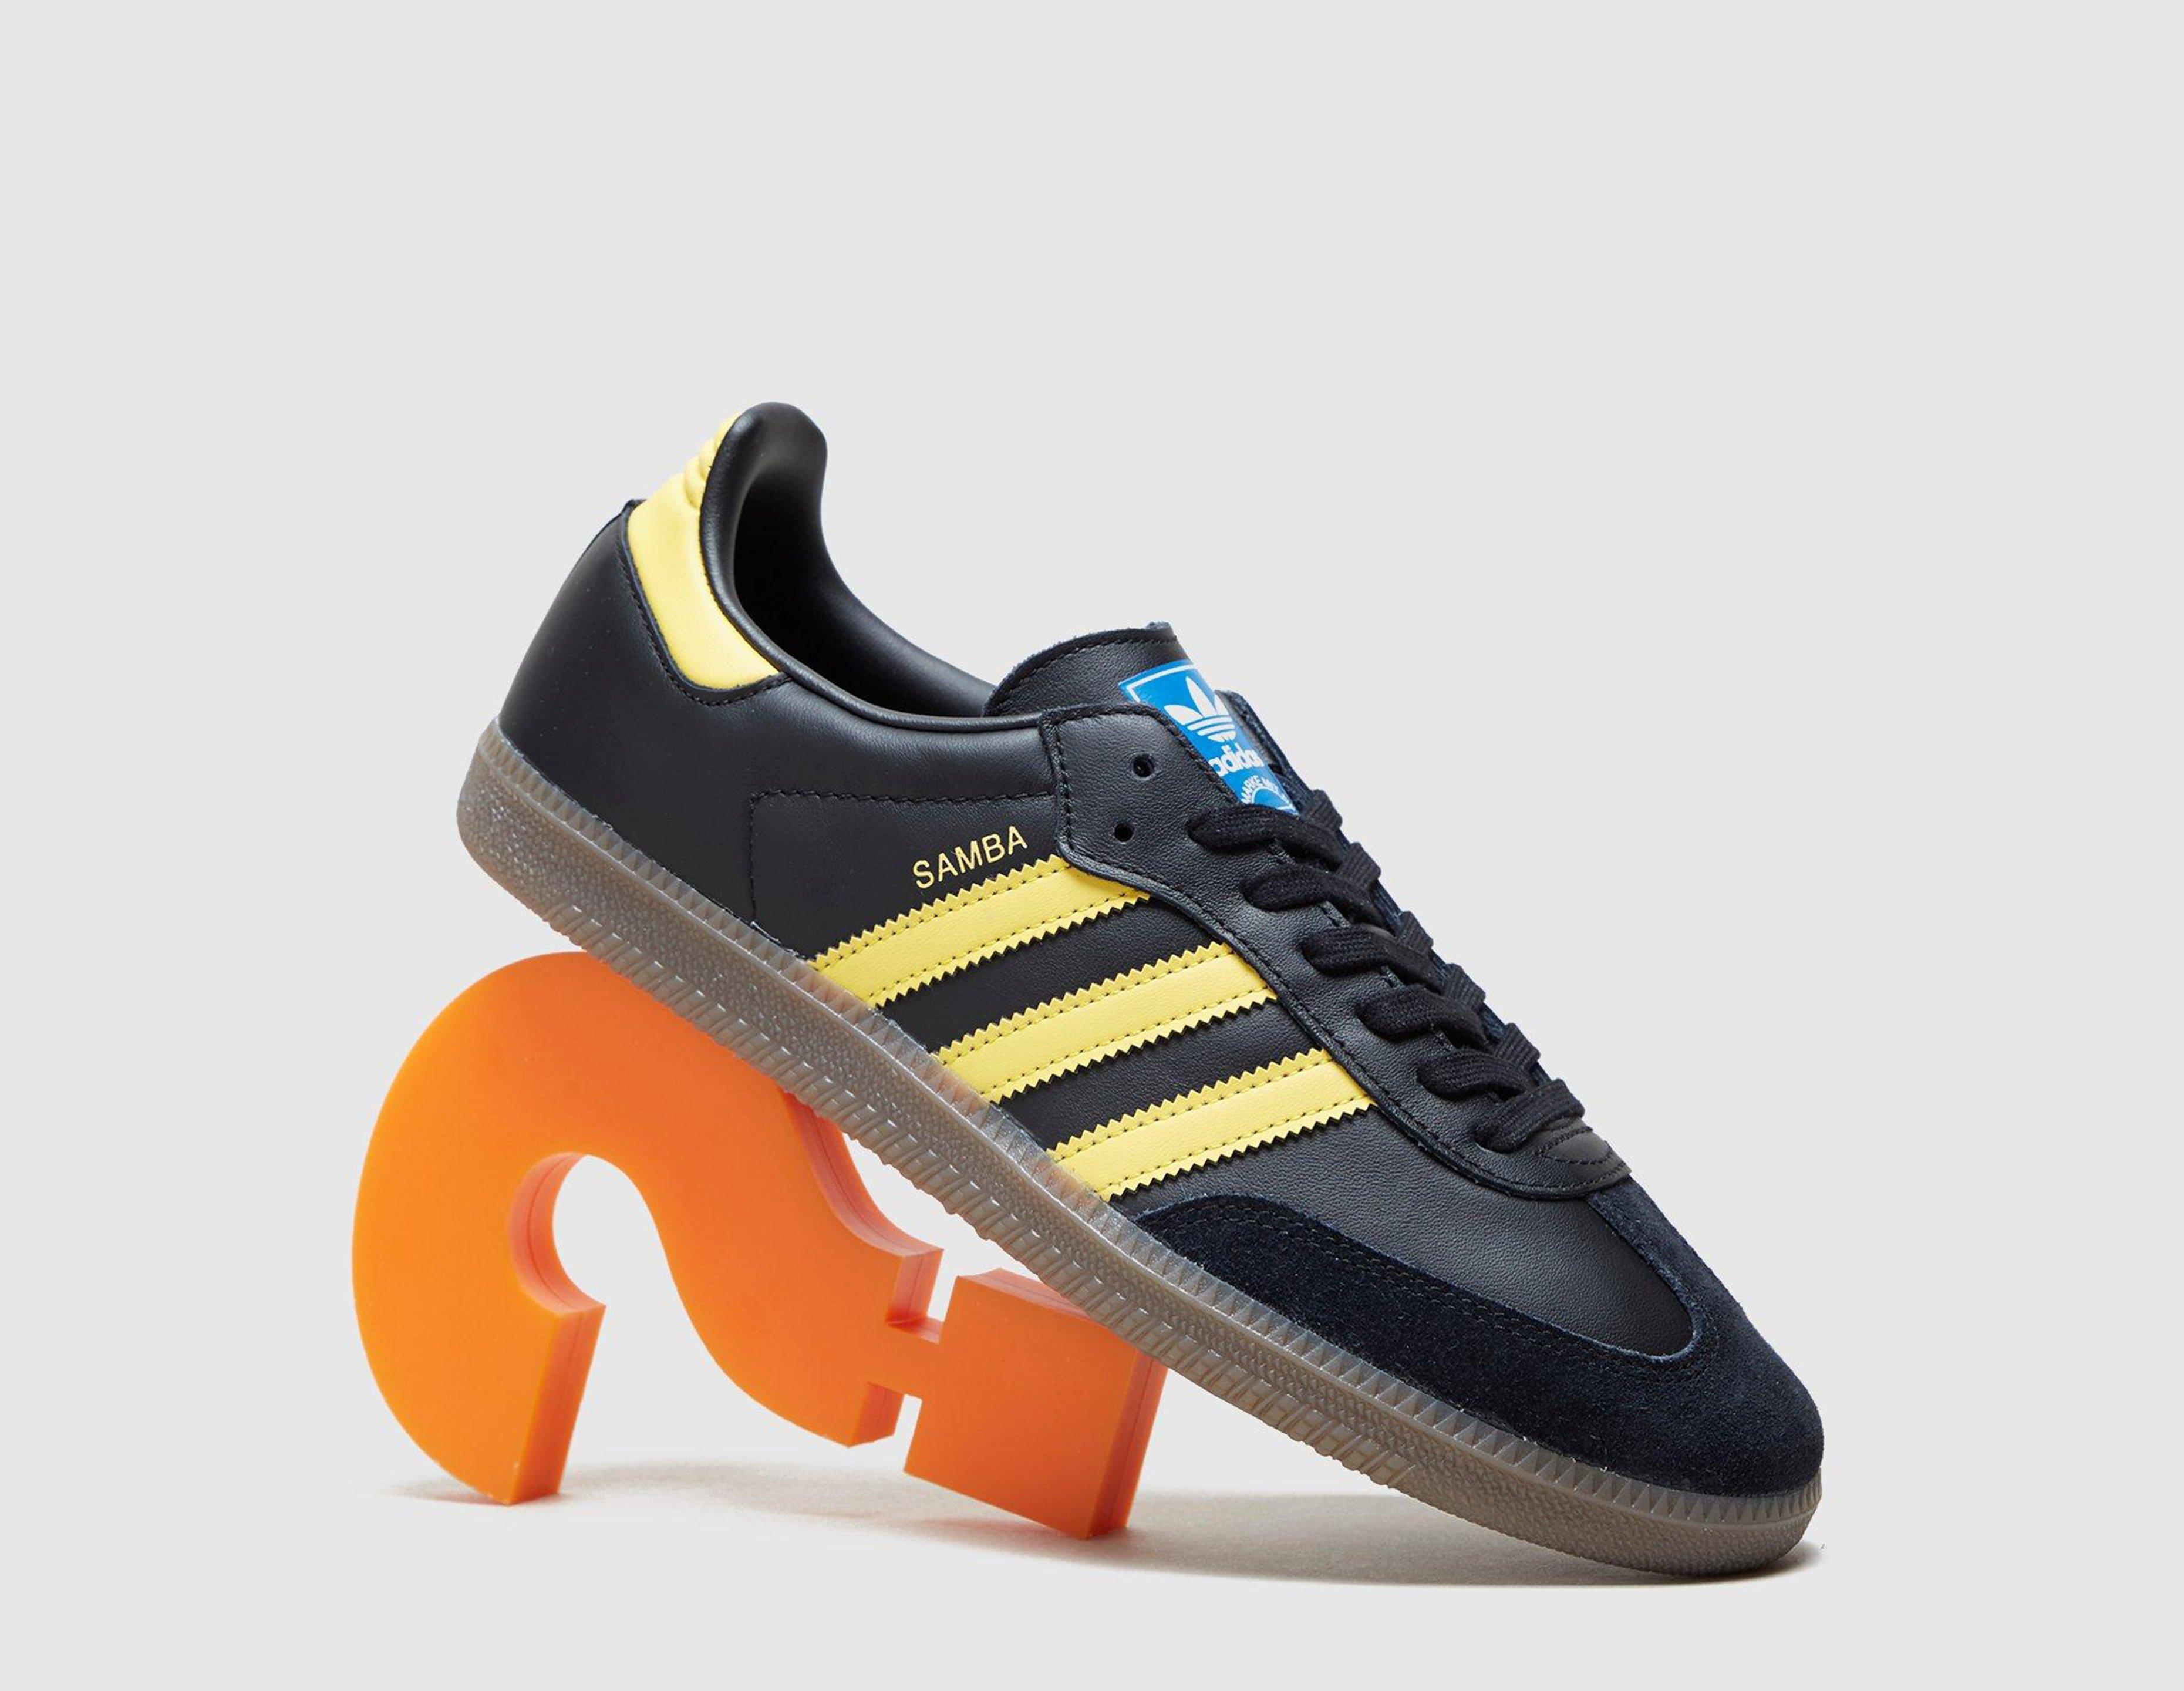 chaussure de foot synthétique adidas